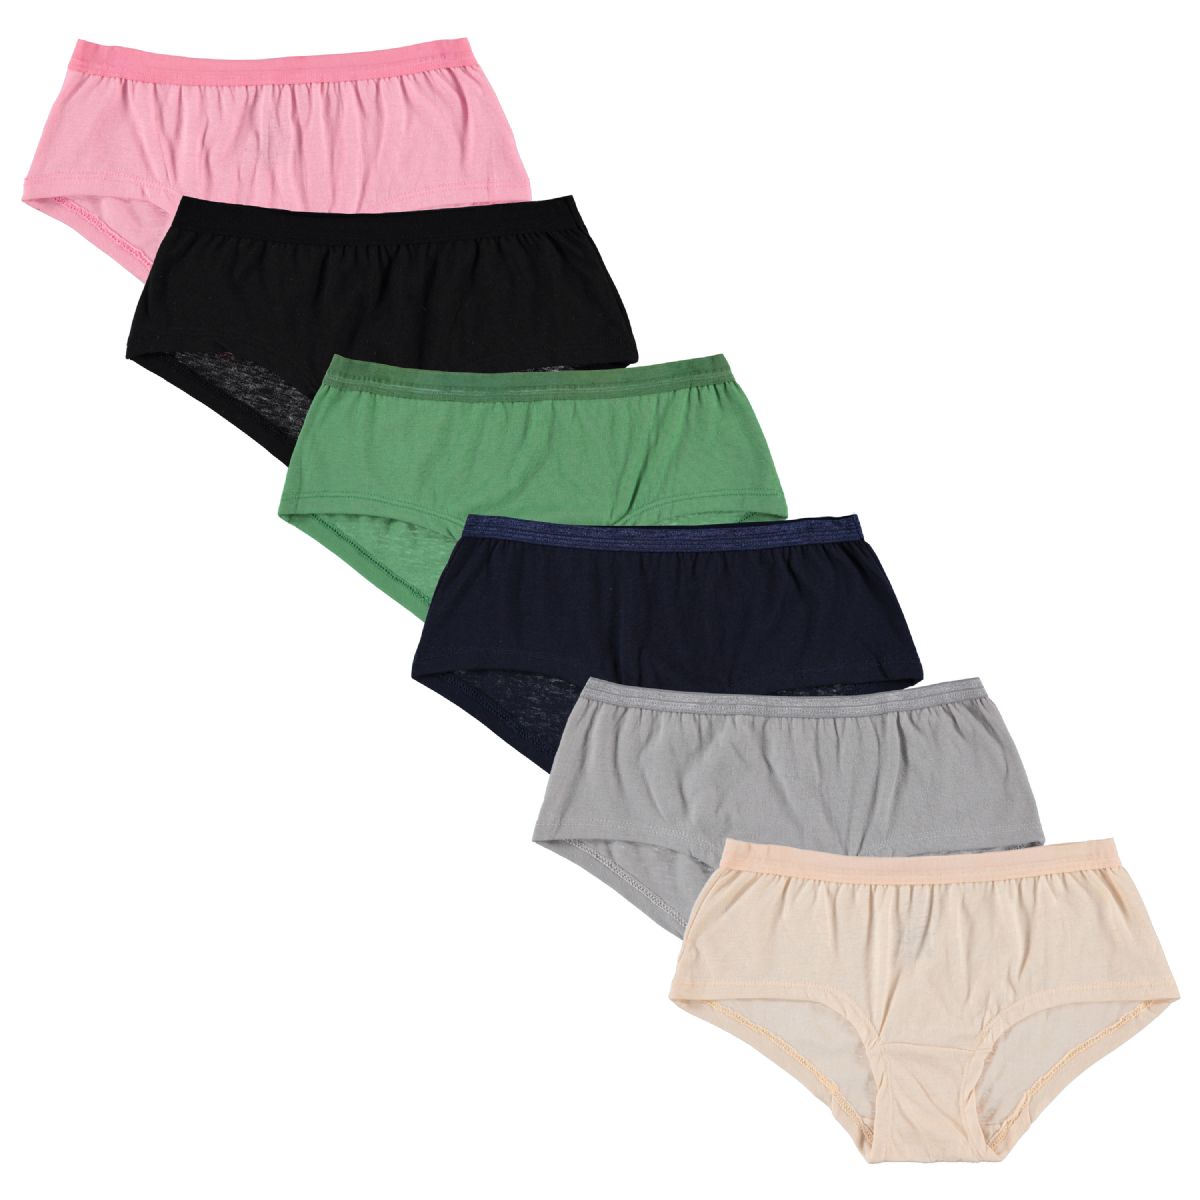 36 Pieces Wakoii Ladys Nylon Girdle With Zippered Pocket Assorted Colors  Size Small - Womens Panties & Underwear - at 